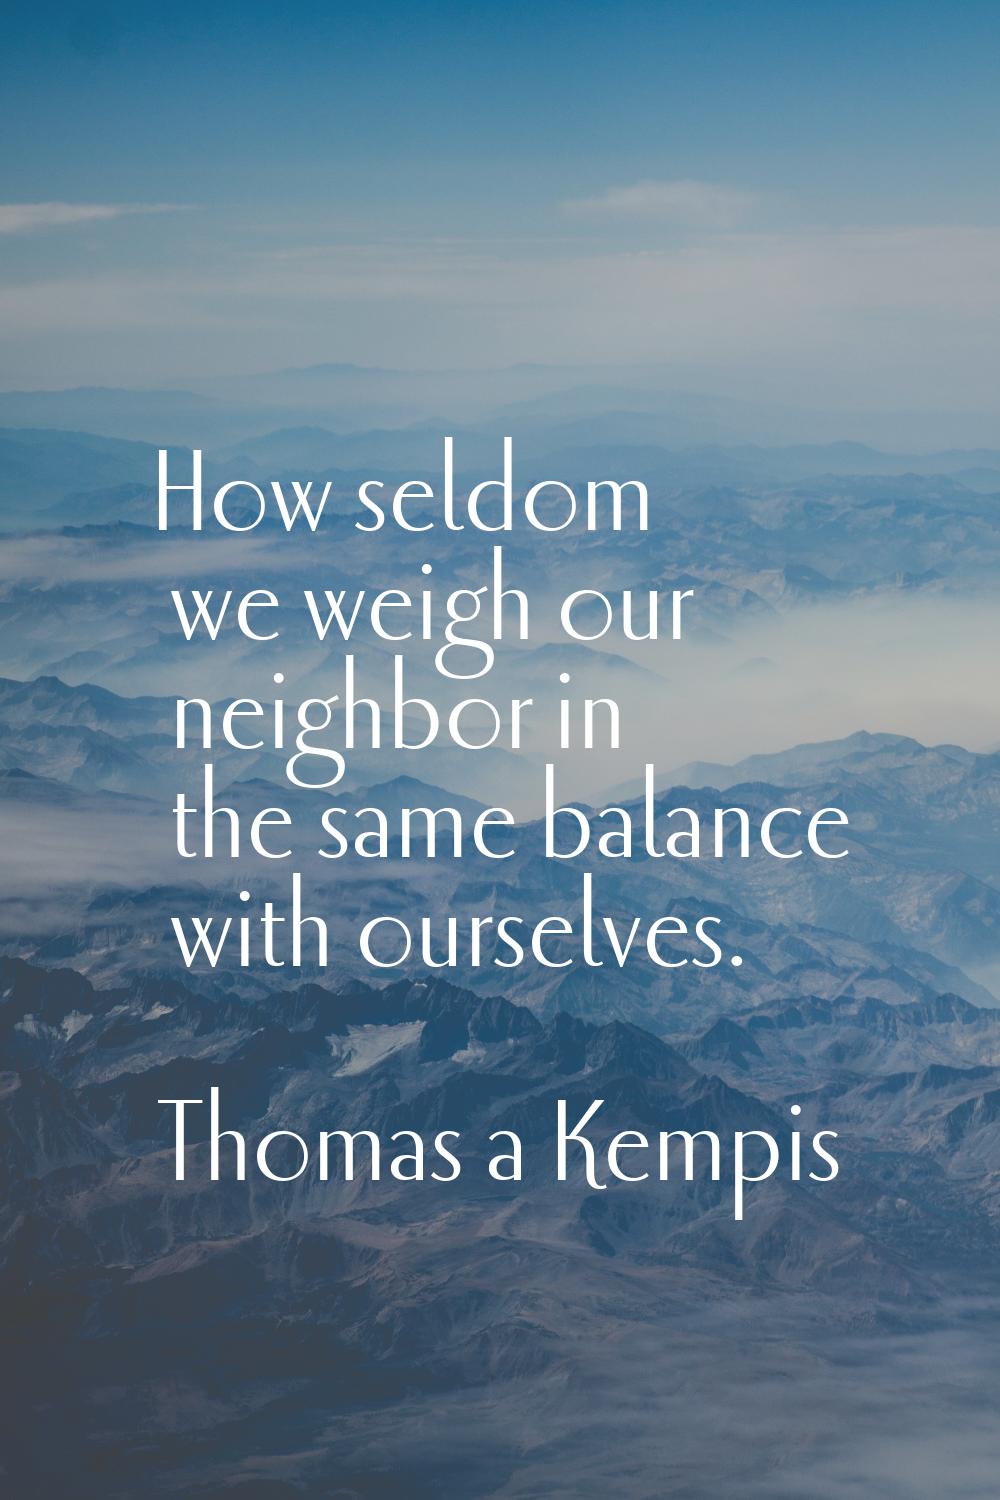 How seldom we weigh our neighbor in the same balance with ourselves.